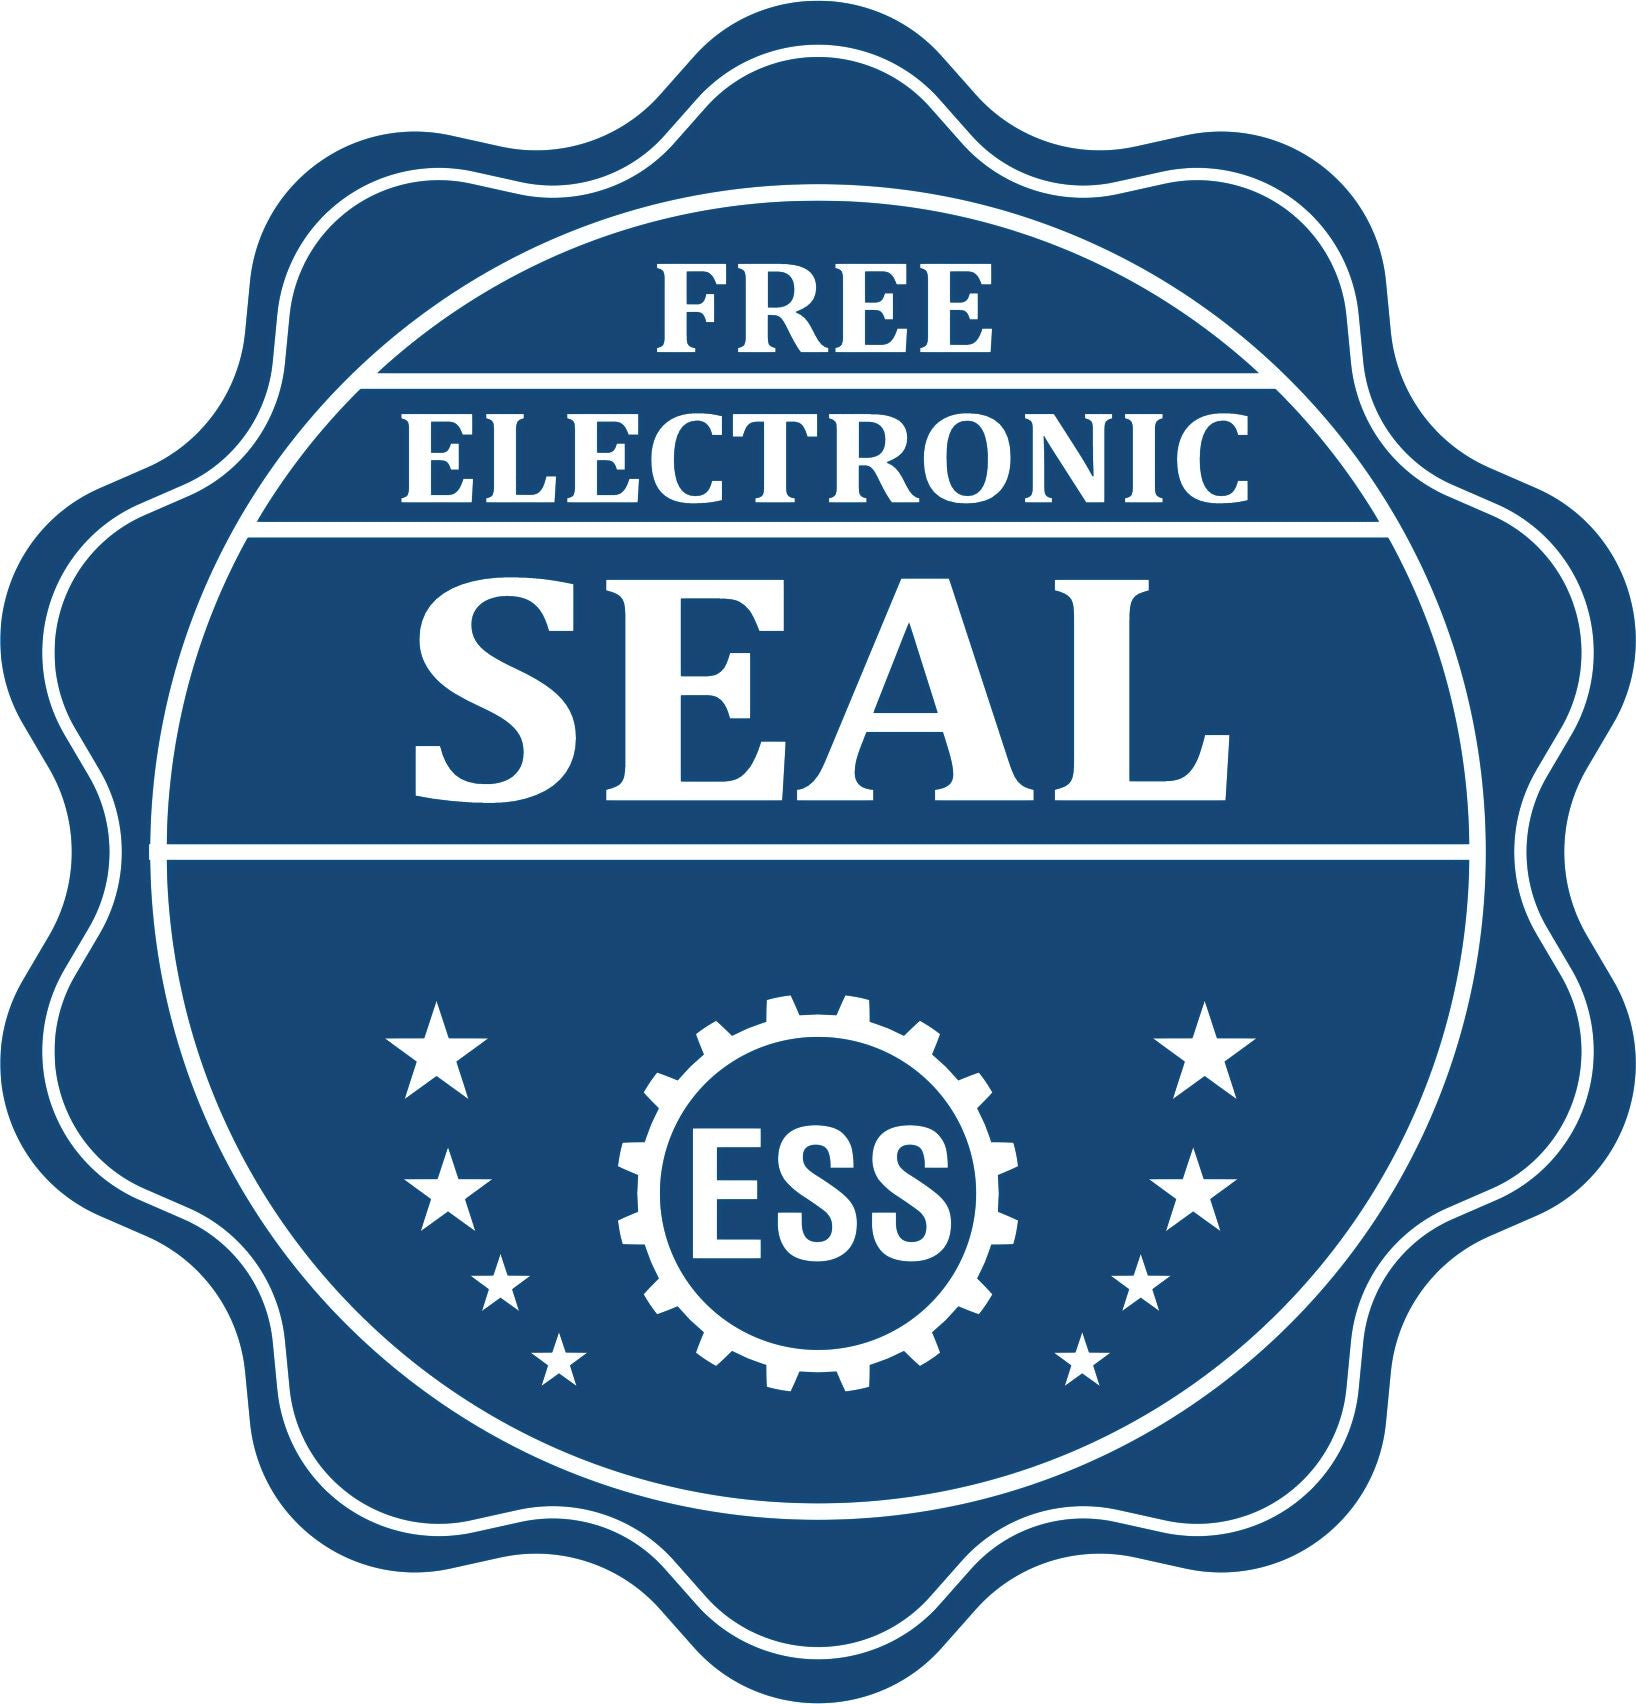 A badge showing a free electronic seal for the Soft Maine Professional Geologist Seal with stars and the ESS gear on the emblem.